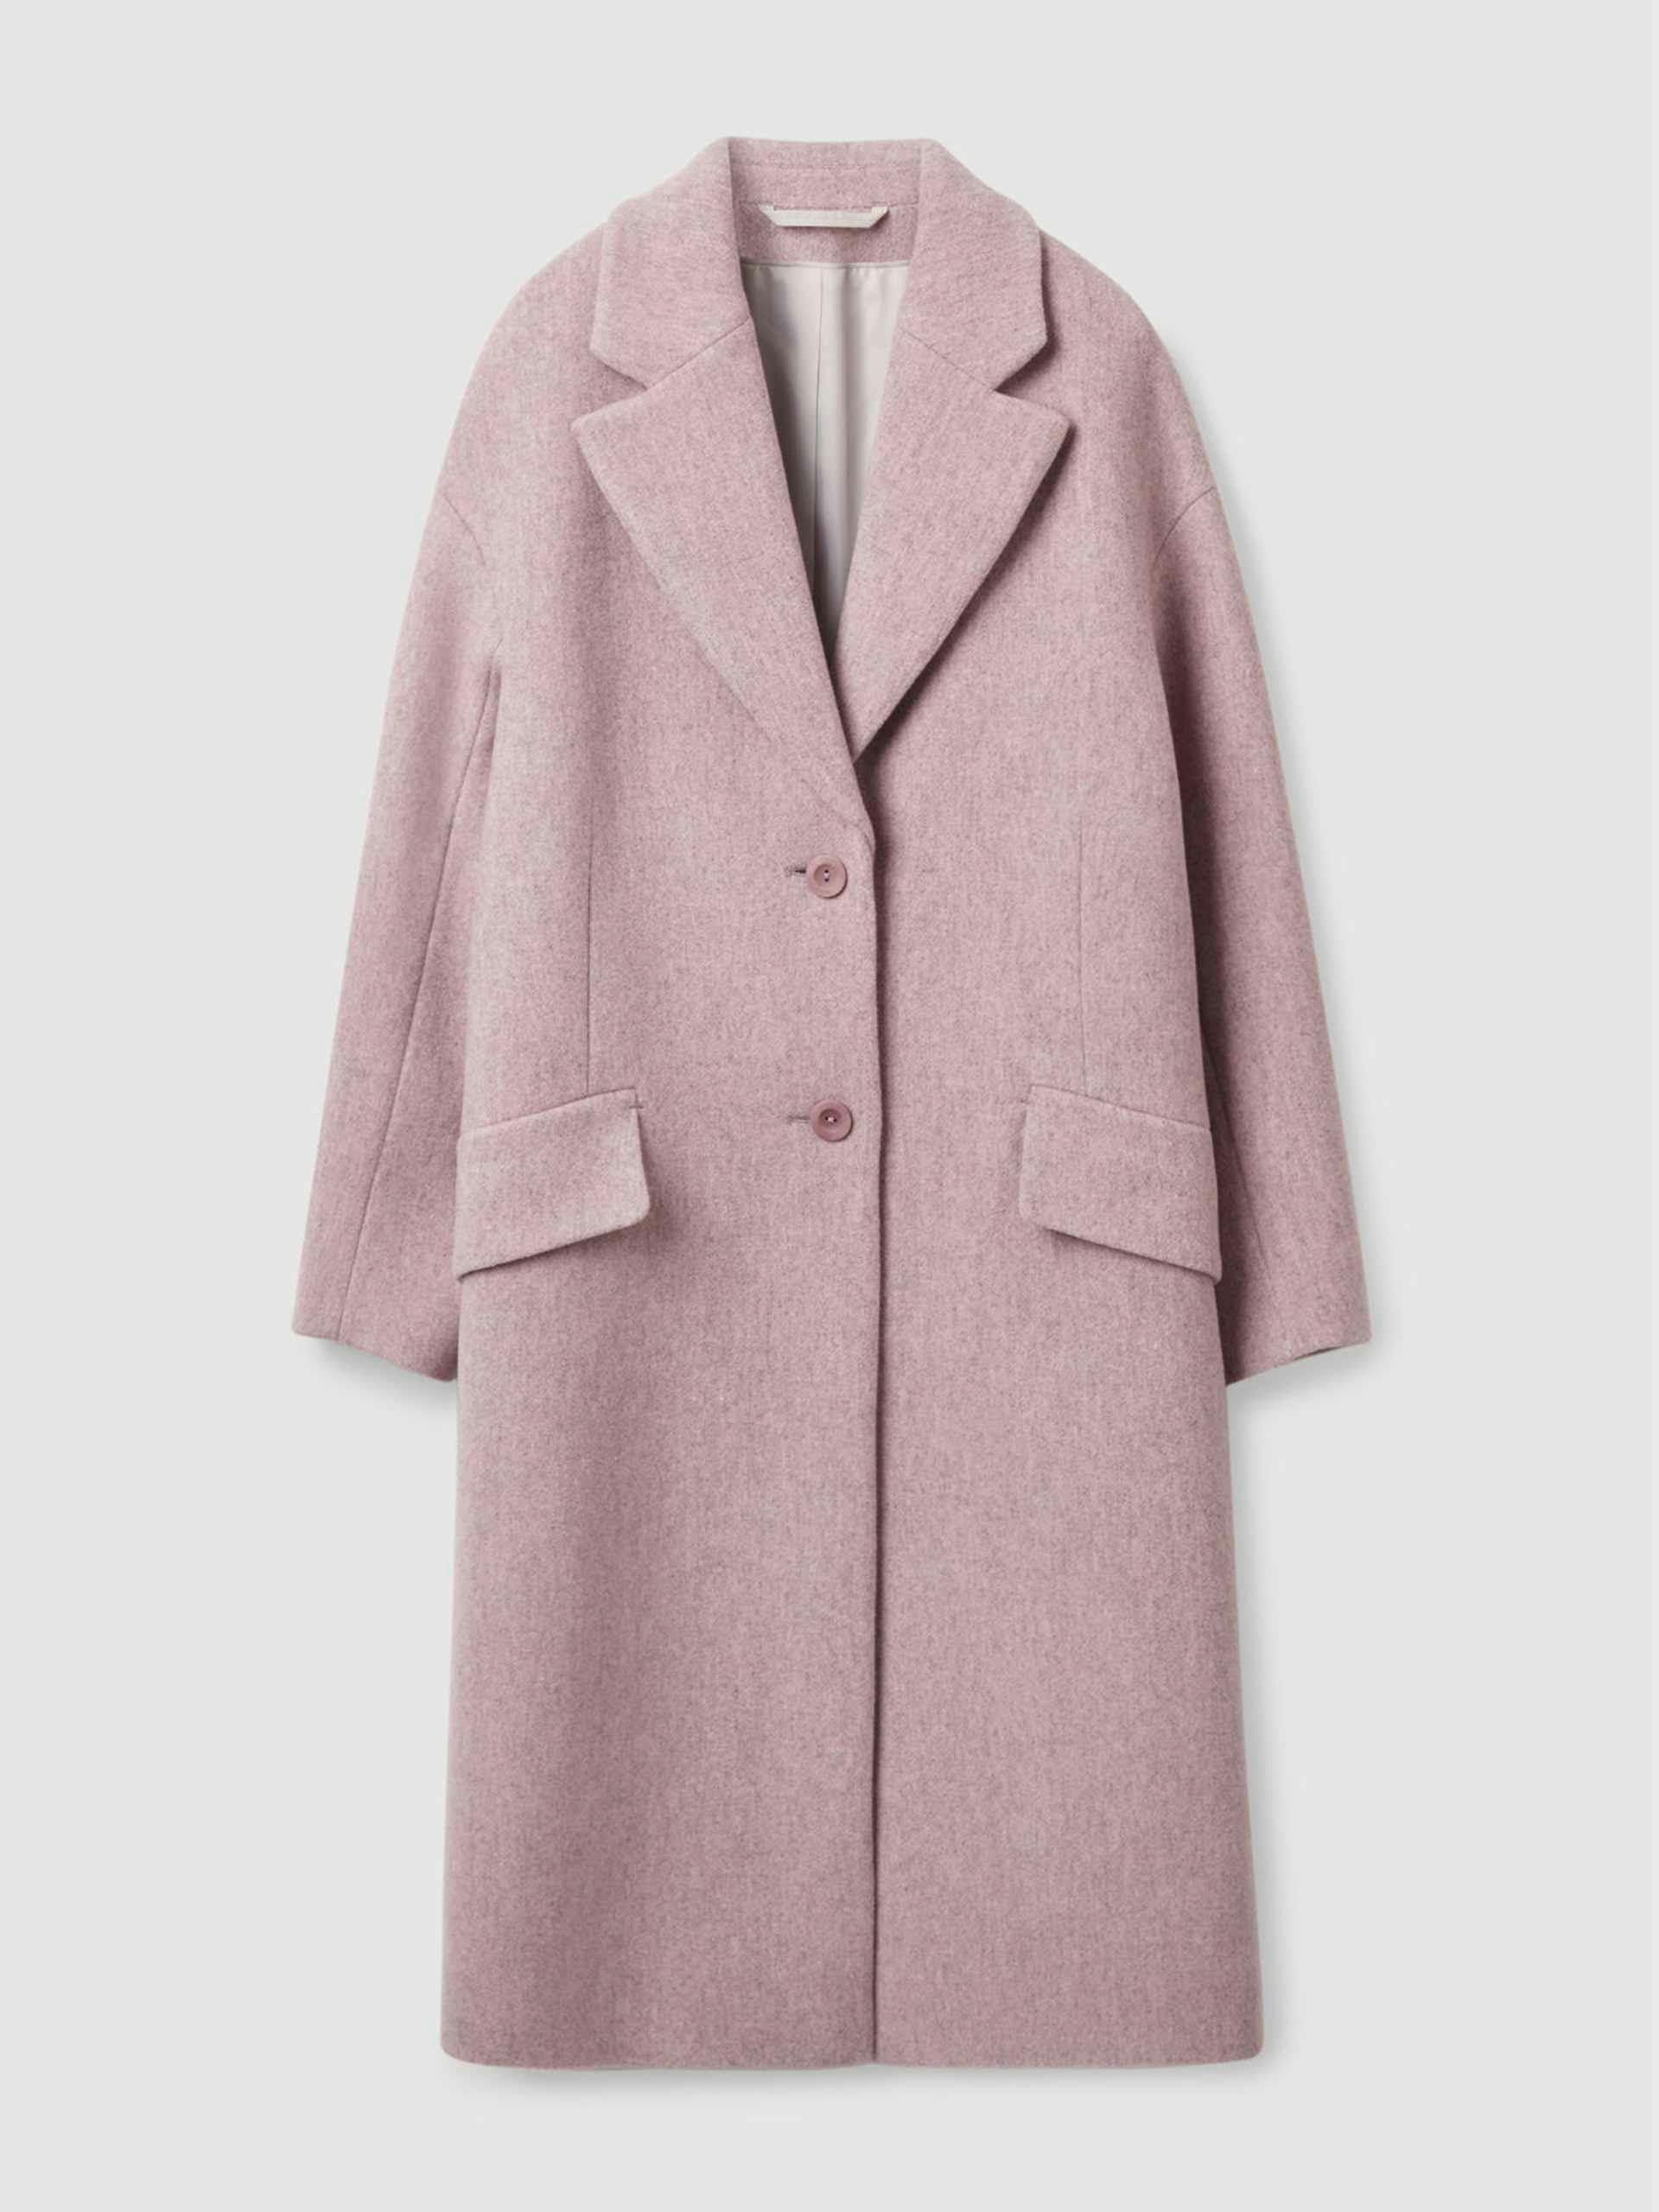 Single breasted dusty pink coat